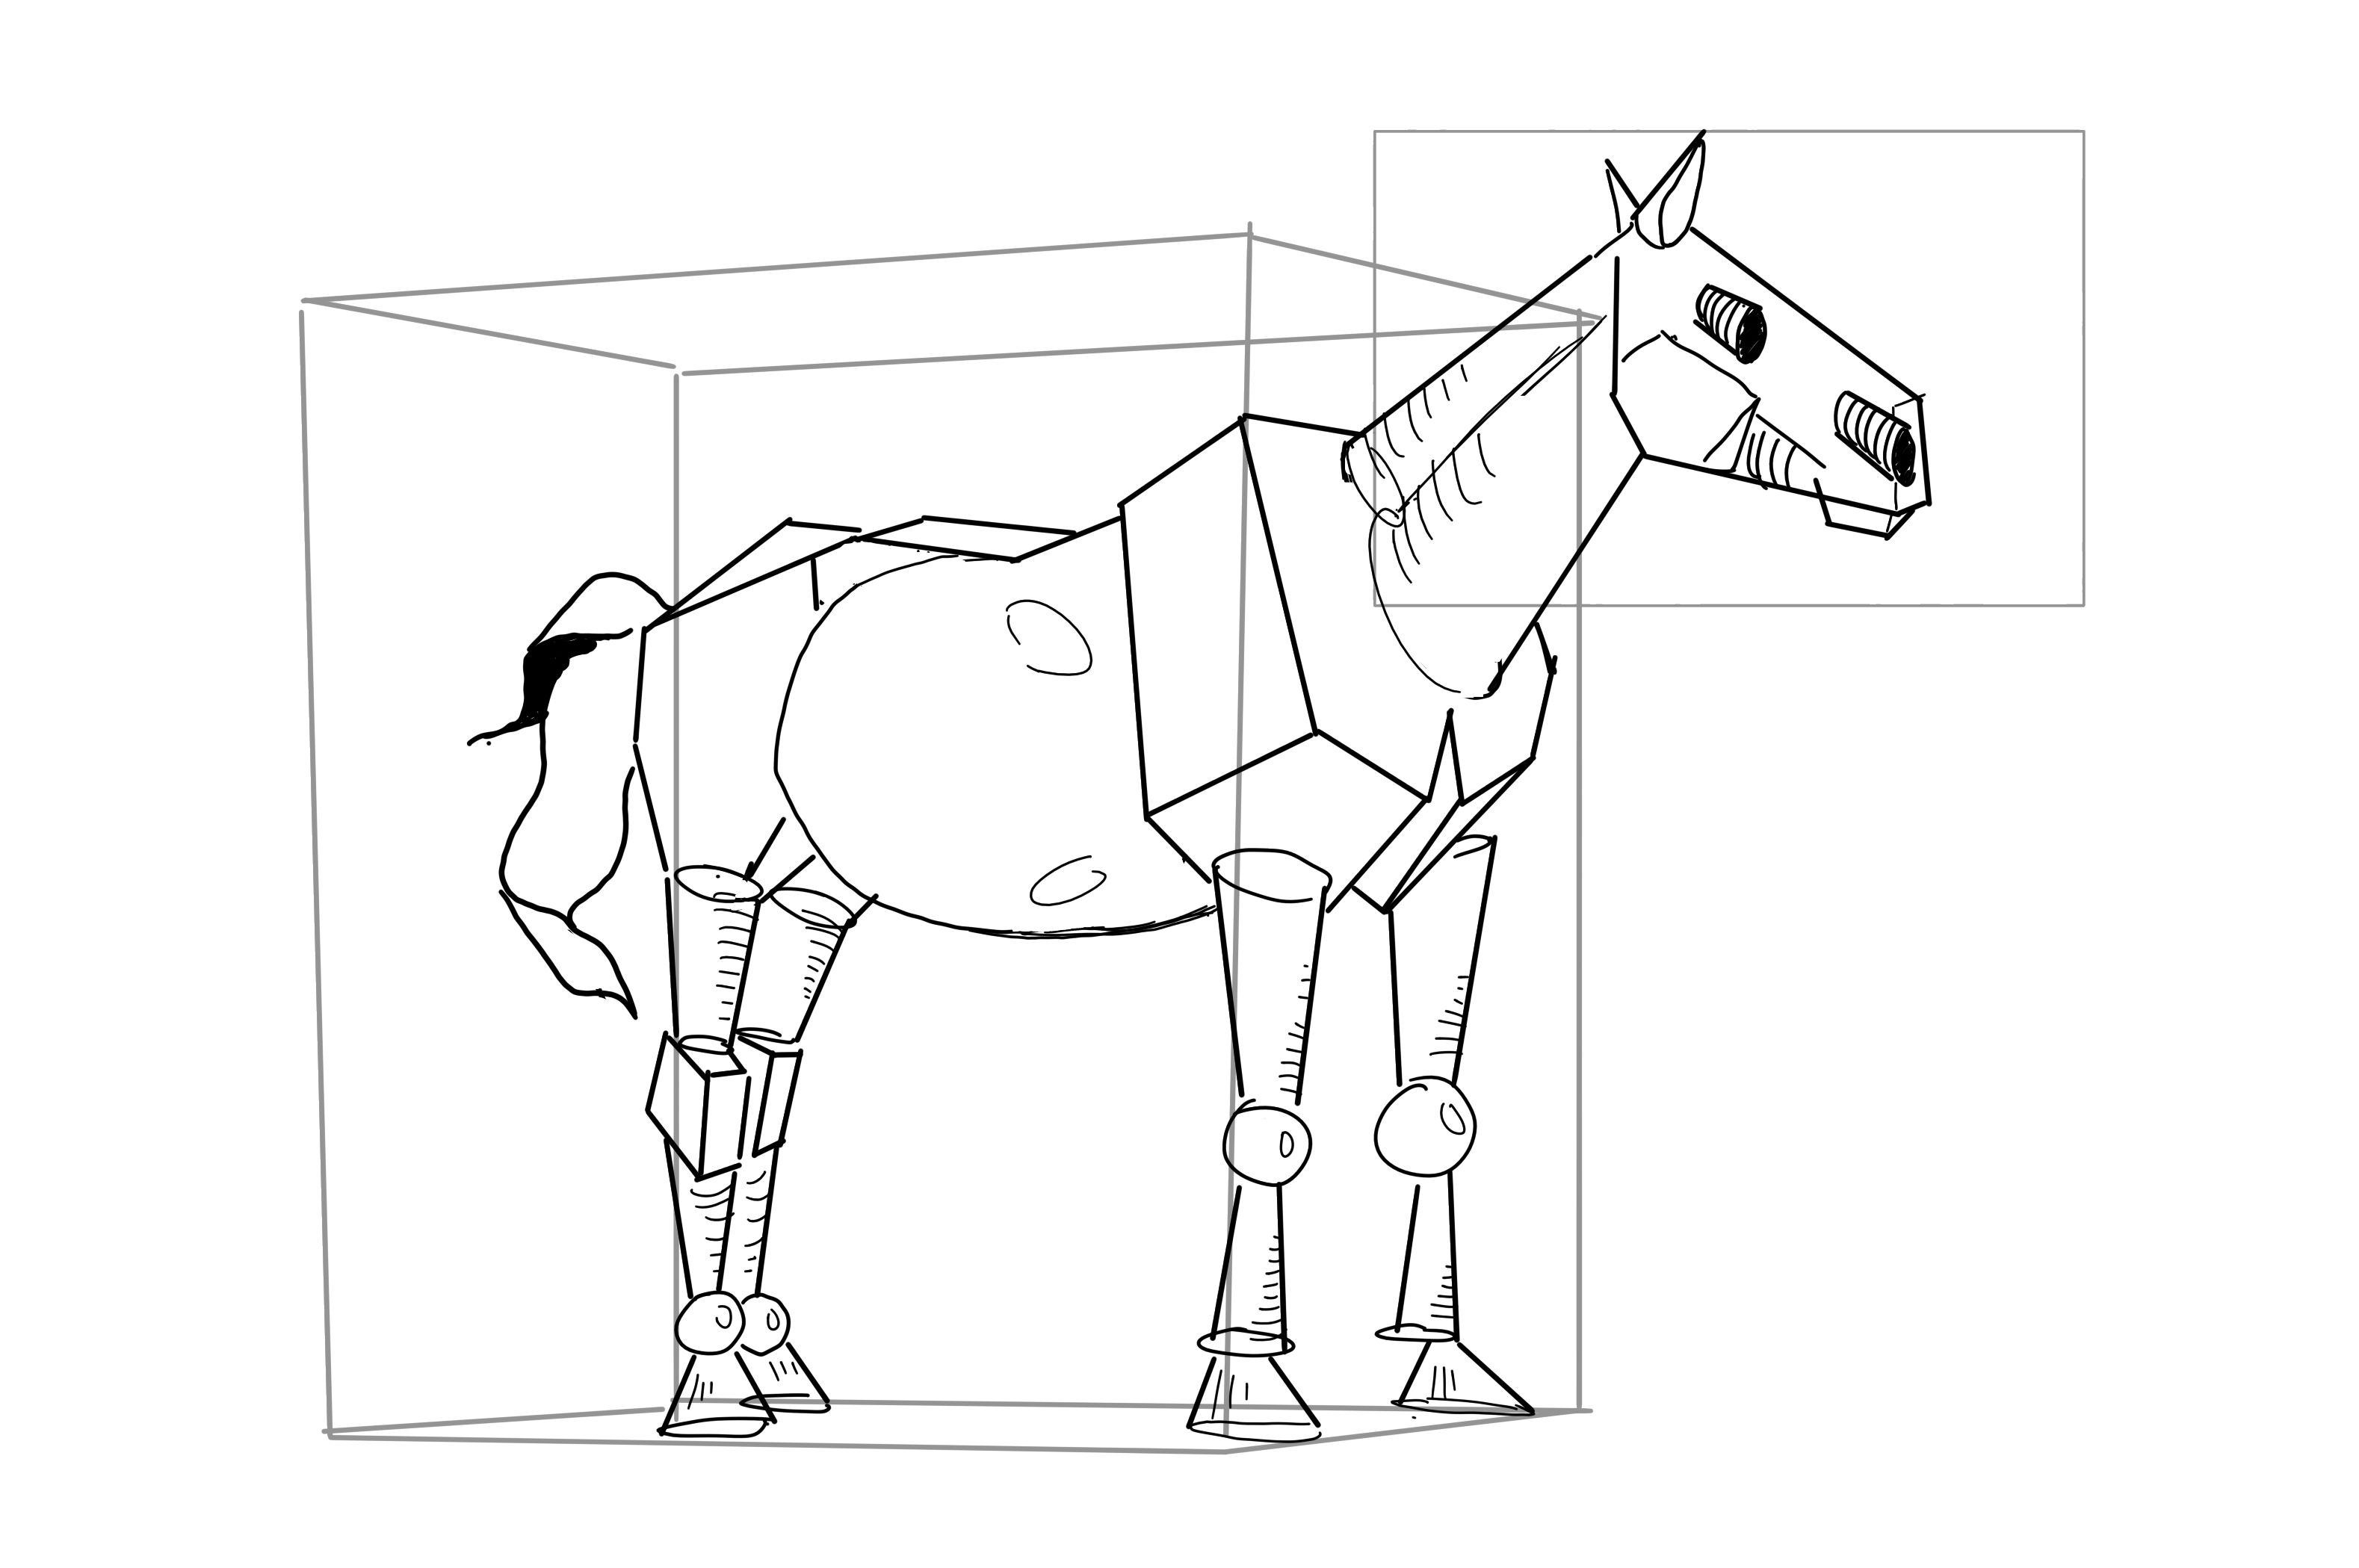 A simple sketch of the same horse as before, but build up from simple shapes such as cubes, cilinders, spheres and cones.